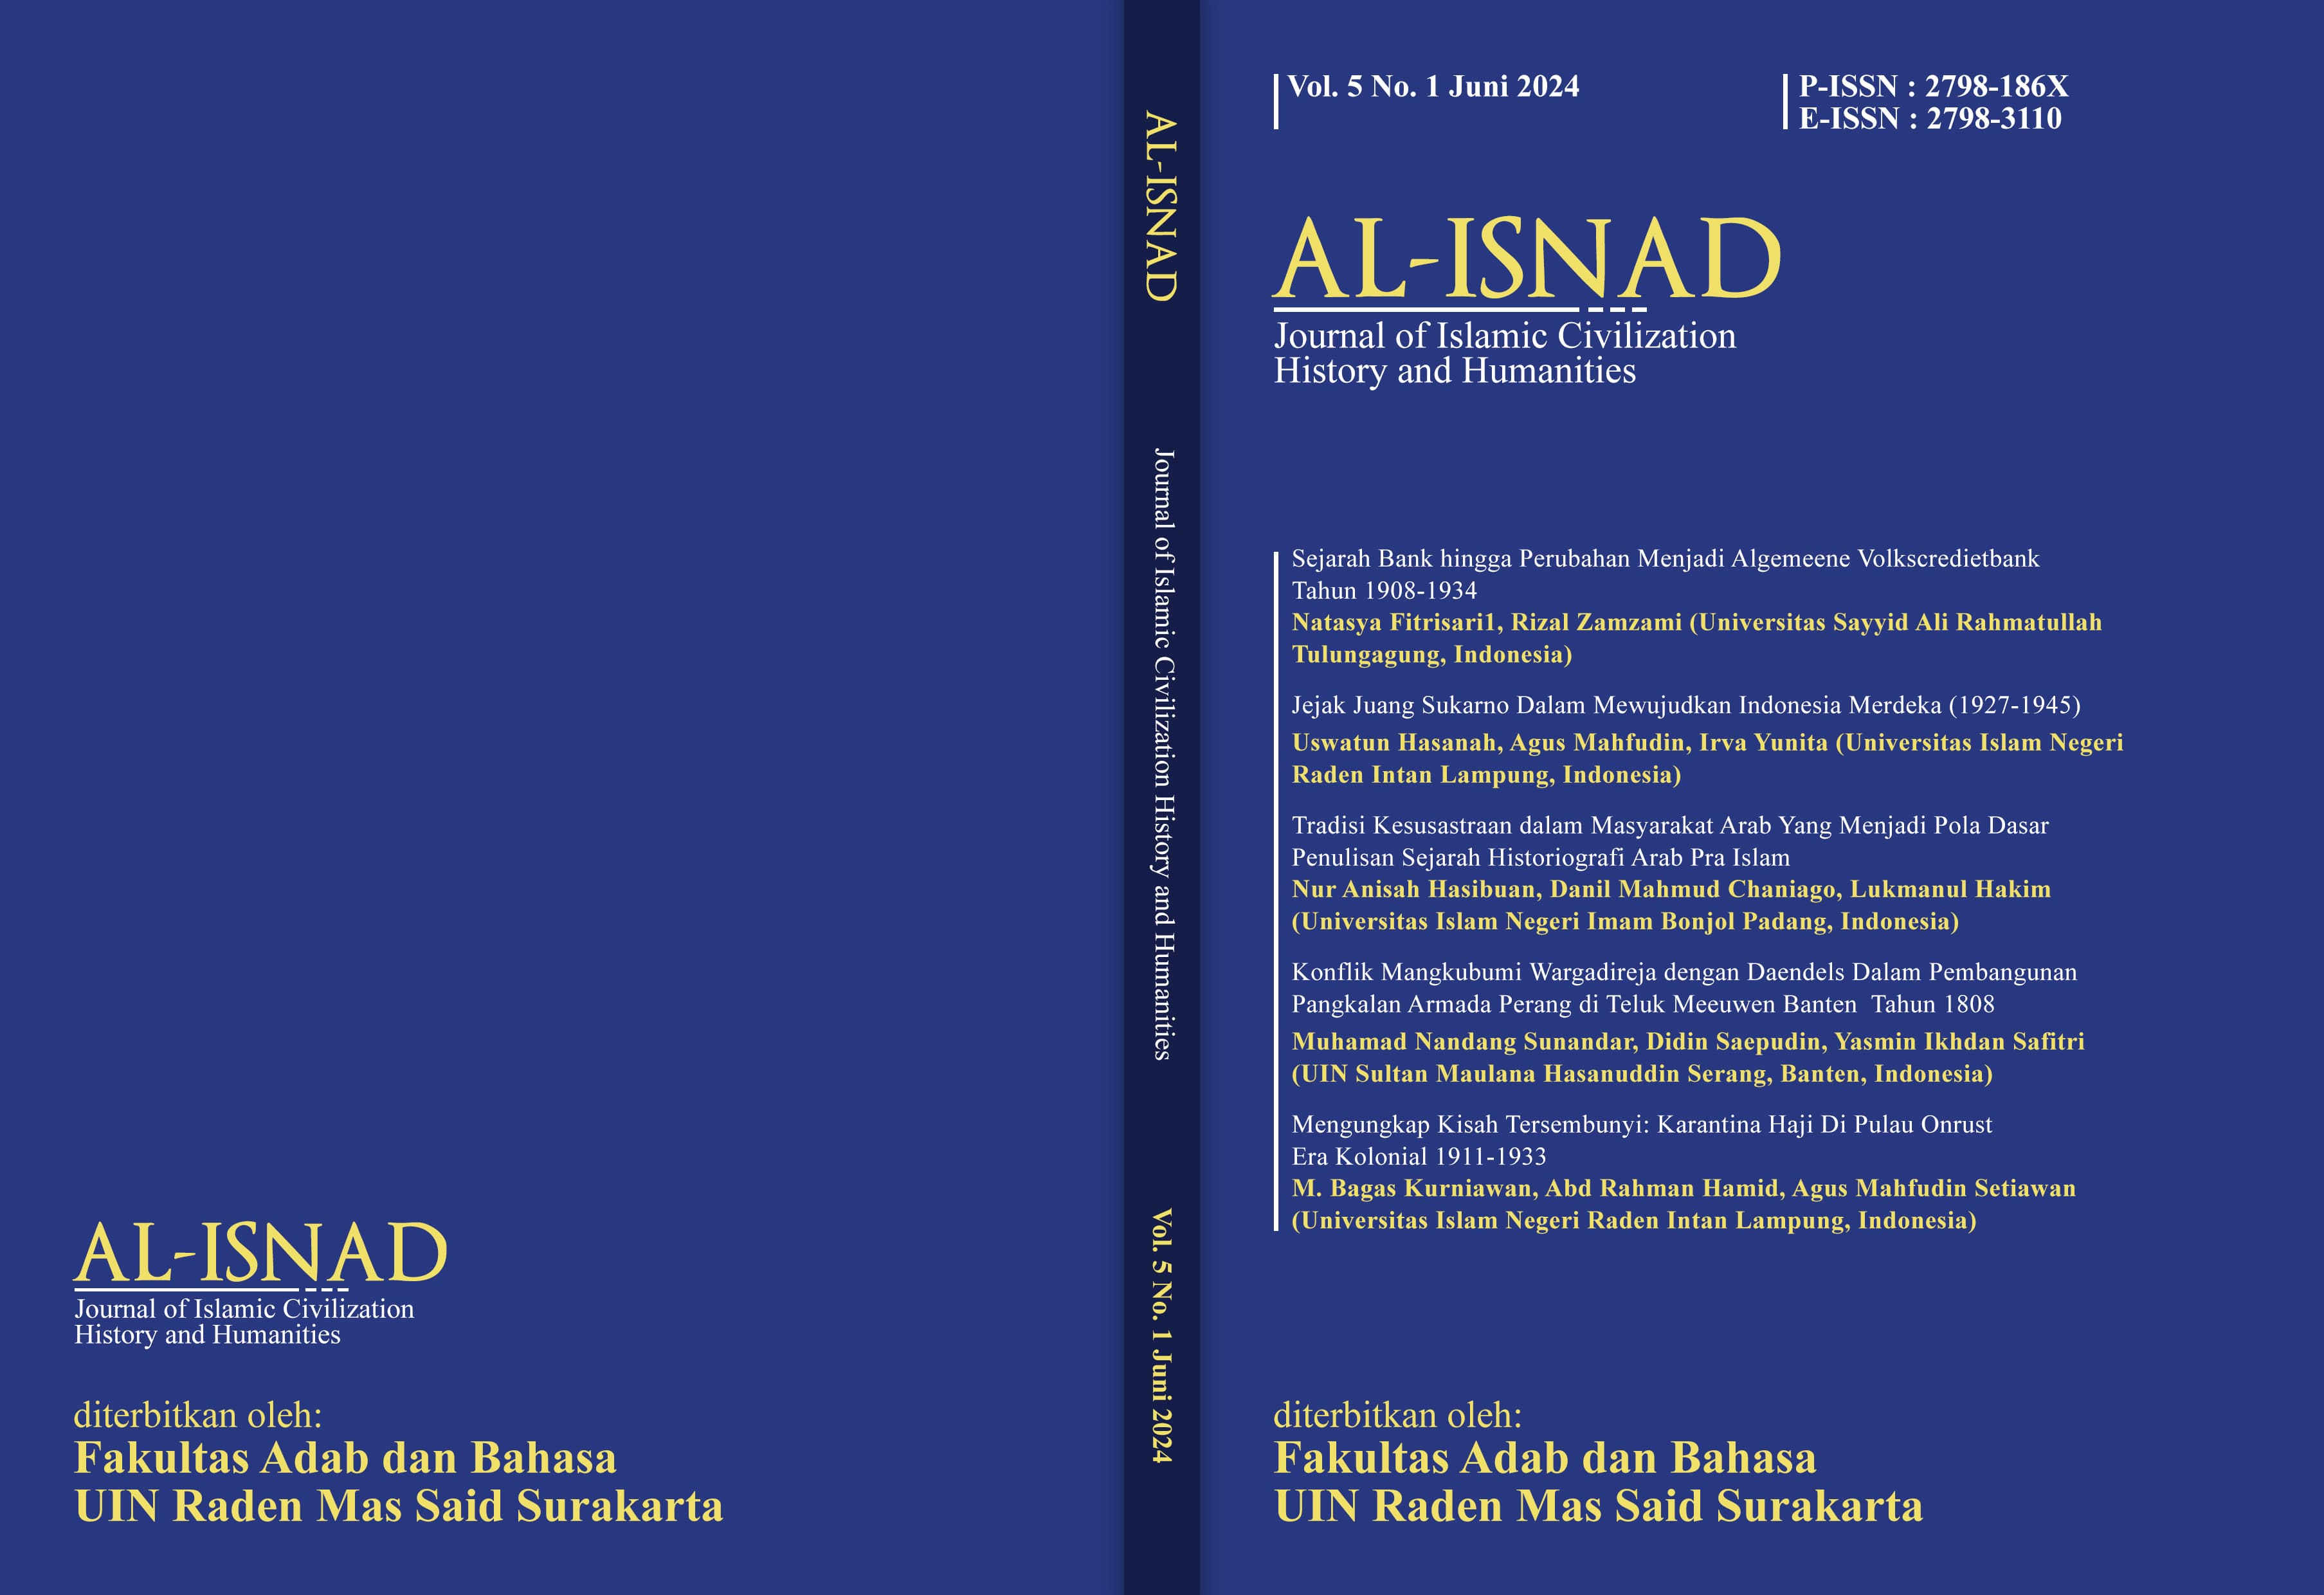 					View Vol. 5 No. 01 (2024): Al-Isnad: Journal of Islamic Civilization History and Humanities
				